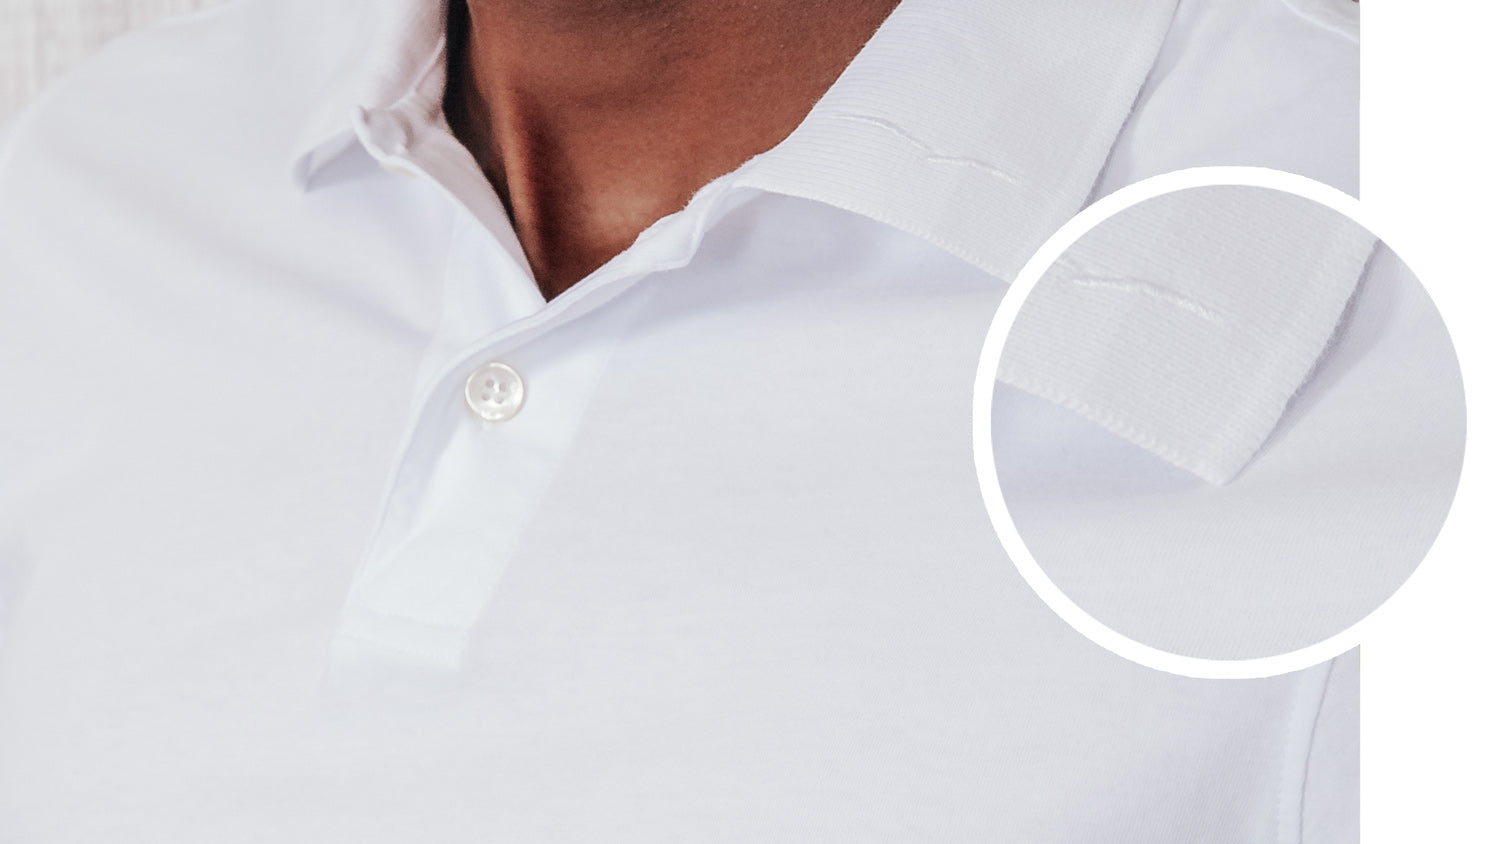 Close up of a polo shirt made of 100% cotton jersey